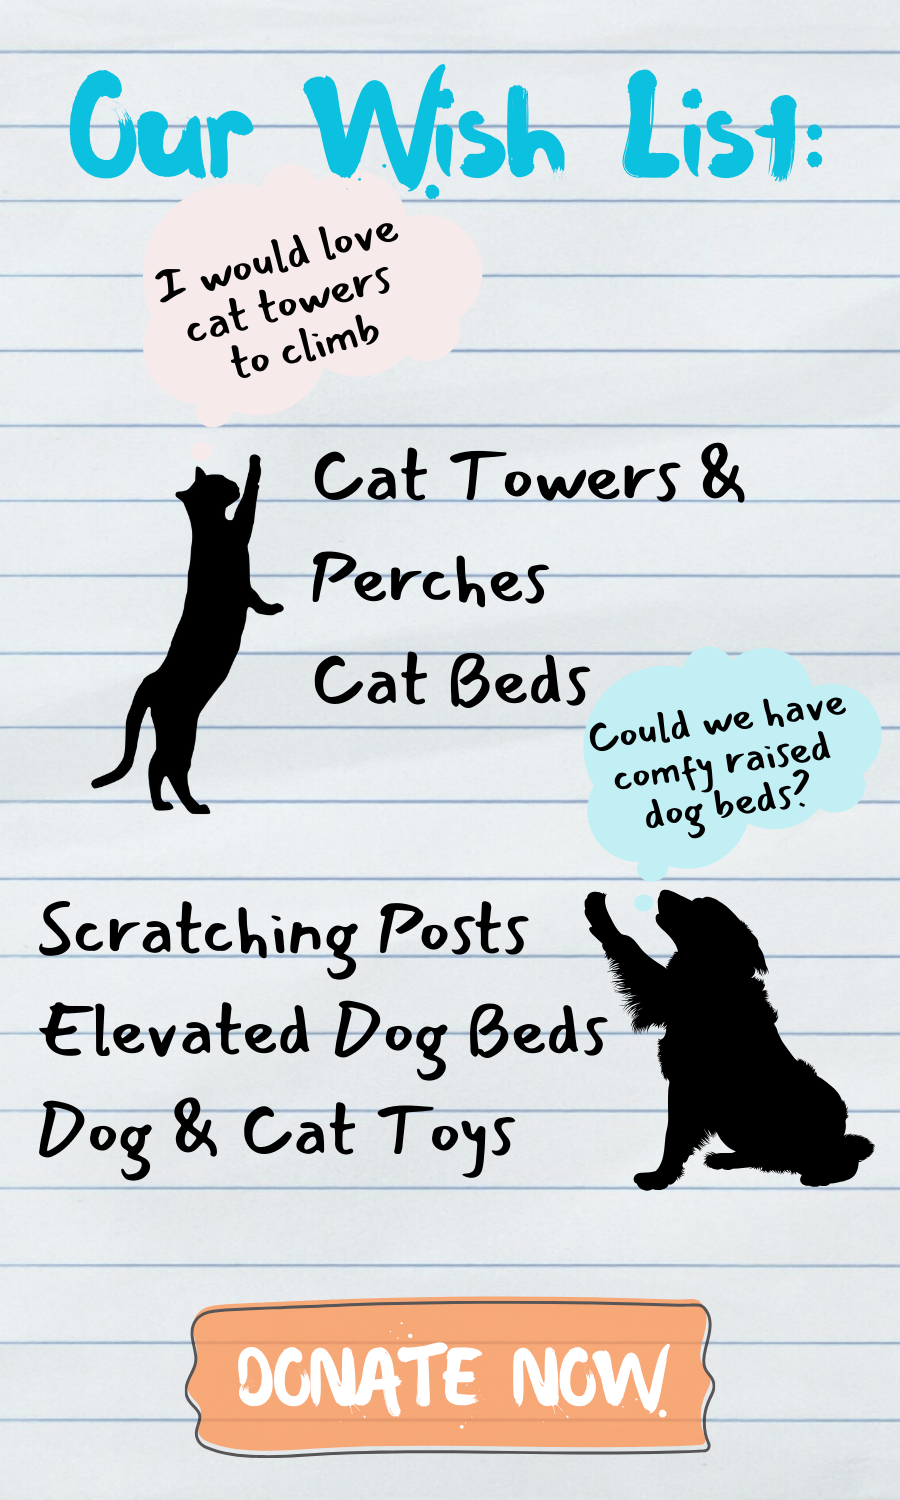 Our Wish List for the new animal shelter